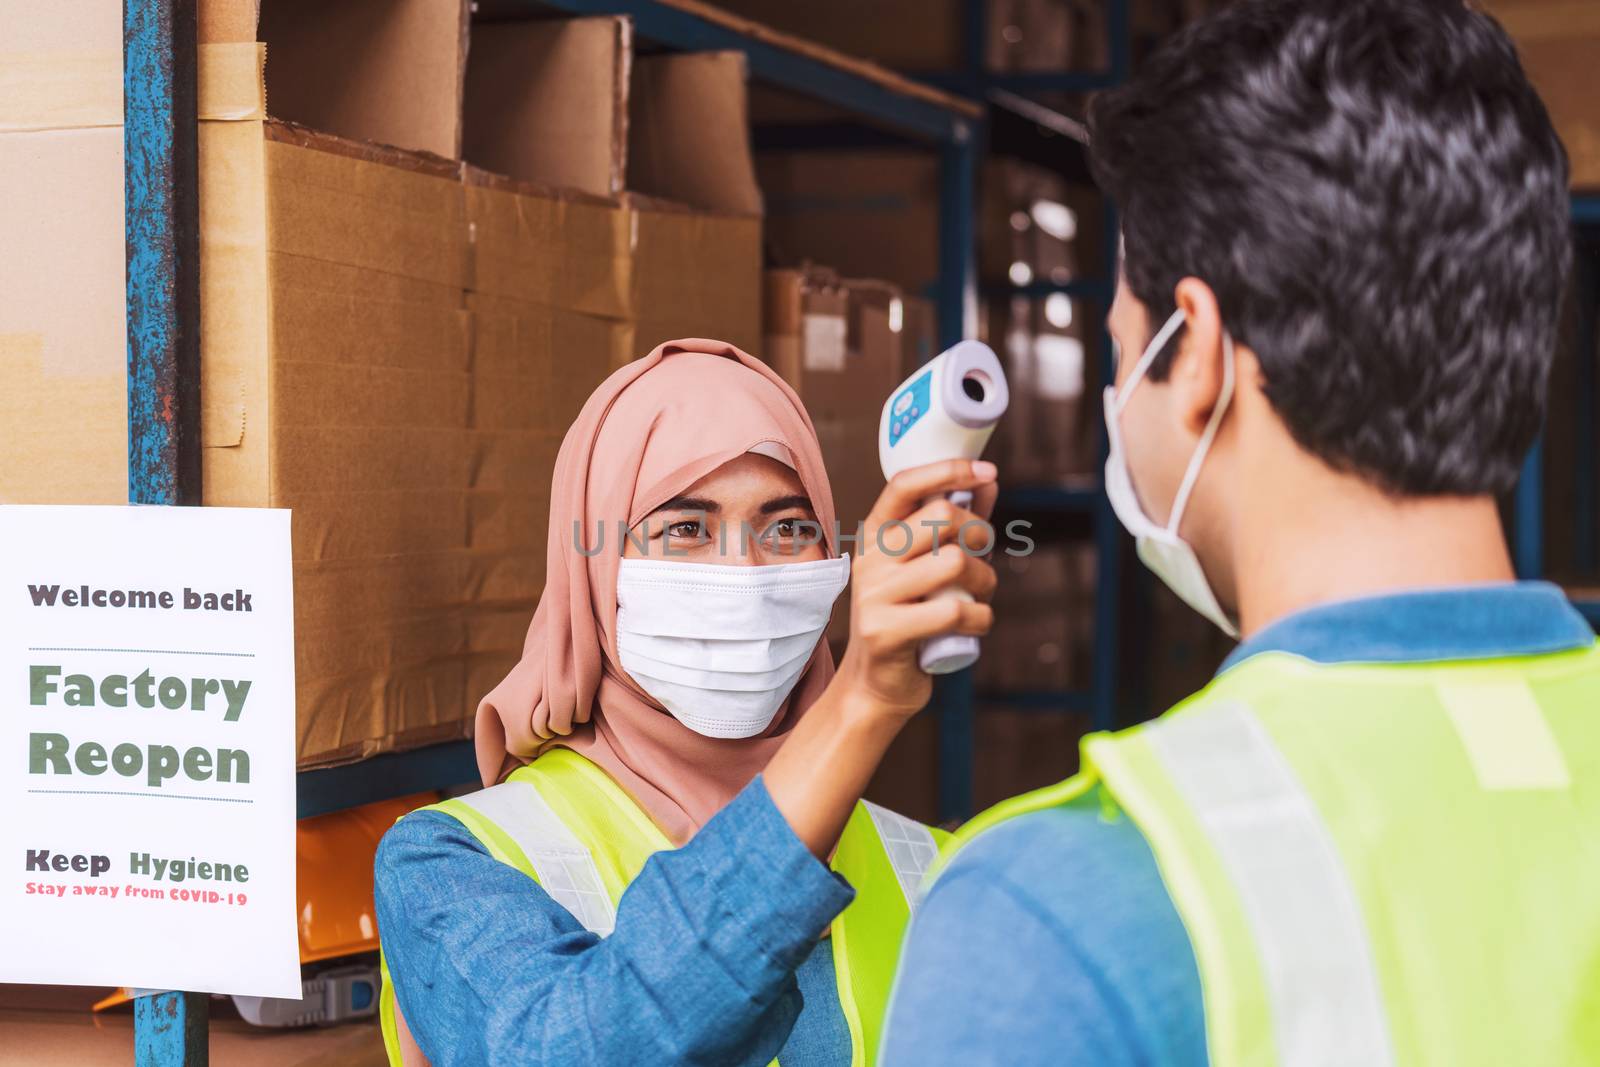 Muslim woman worker wearing surgical mask and Hijab uses Medical Digital Infrared Thermometer measure temperature to Indian man worker with safety clothes before start to work after warehouse reopen